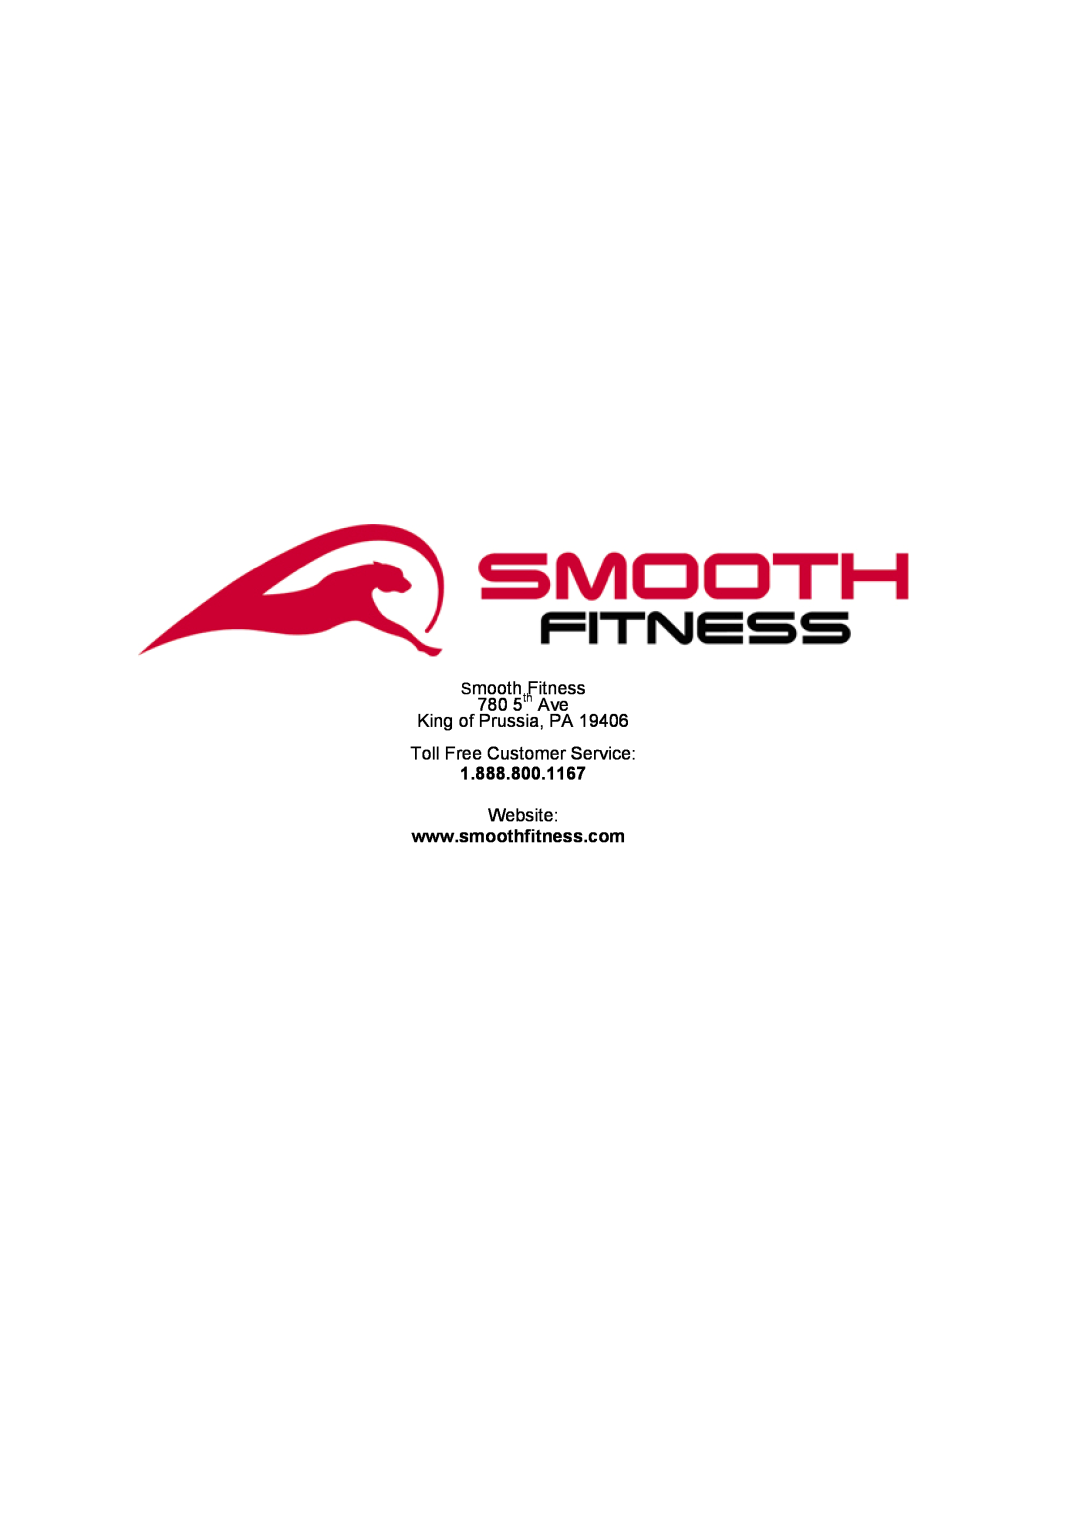 Smooth Fitness 5.65I 28 5.65i TREADMILL, Smooth Fitness 780 5th Ave King of Prussia, PA, Toll Free Customer Service 